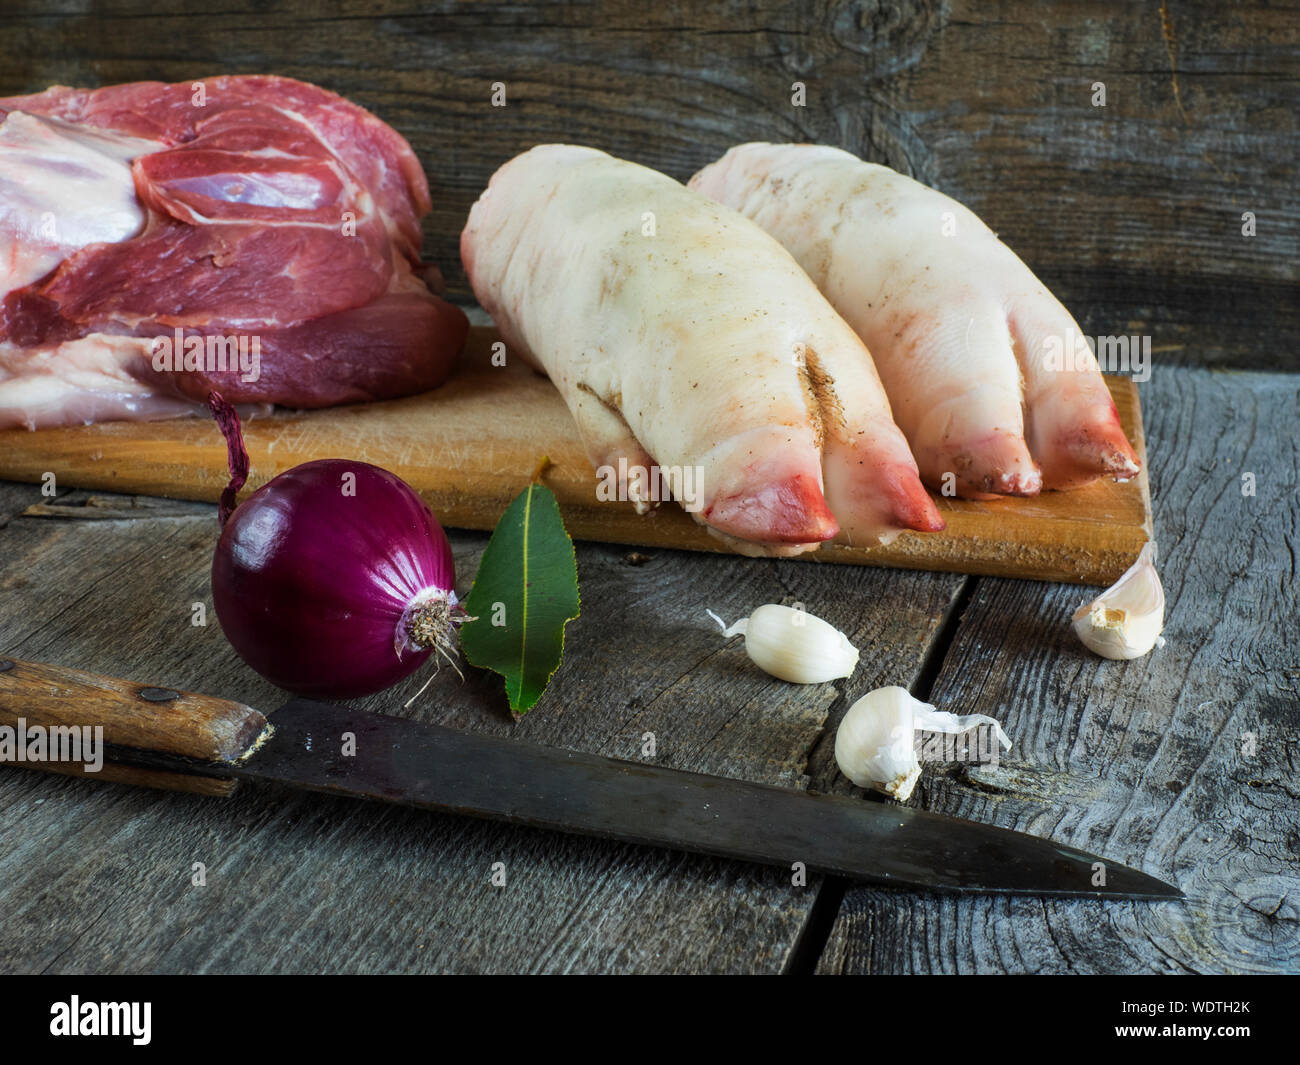 High Angle View Of Raw Food On Wooden Table Stock Photo